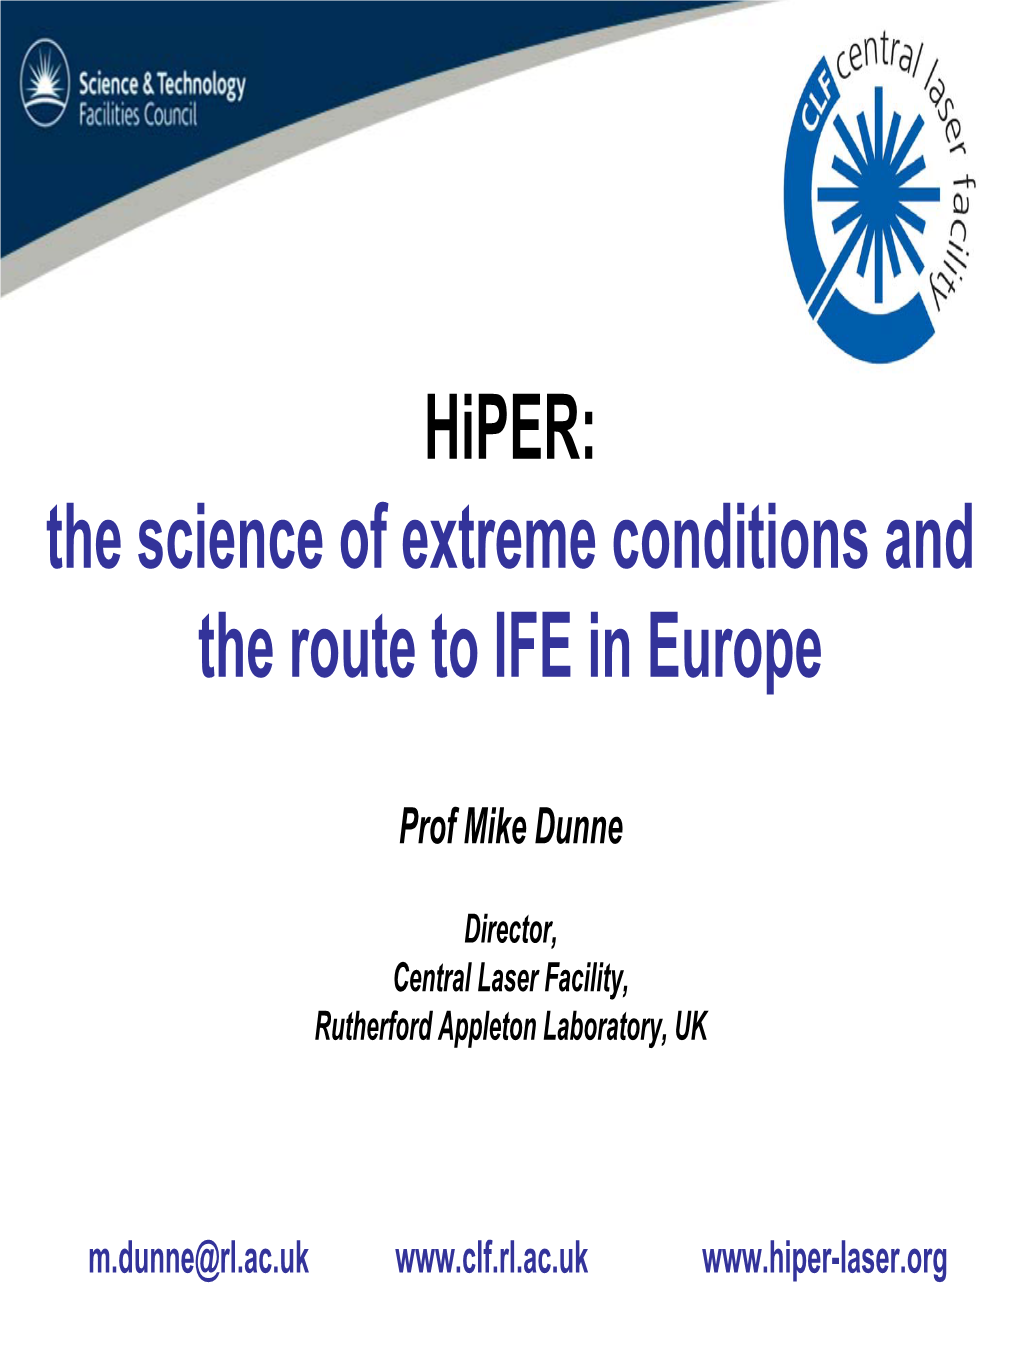 Hiper: the Science of Extreme Conditions and the Route to IFE in Europe